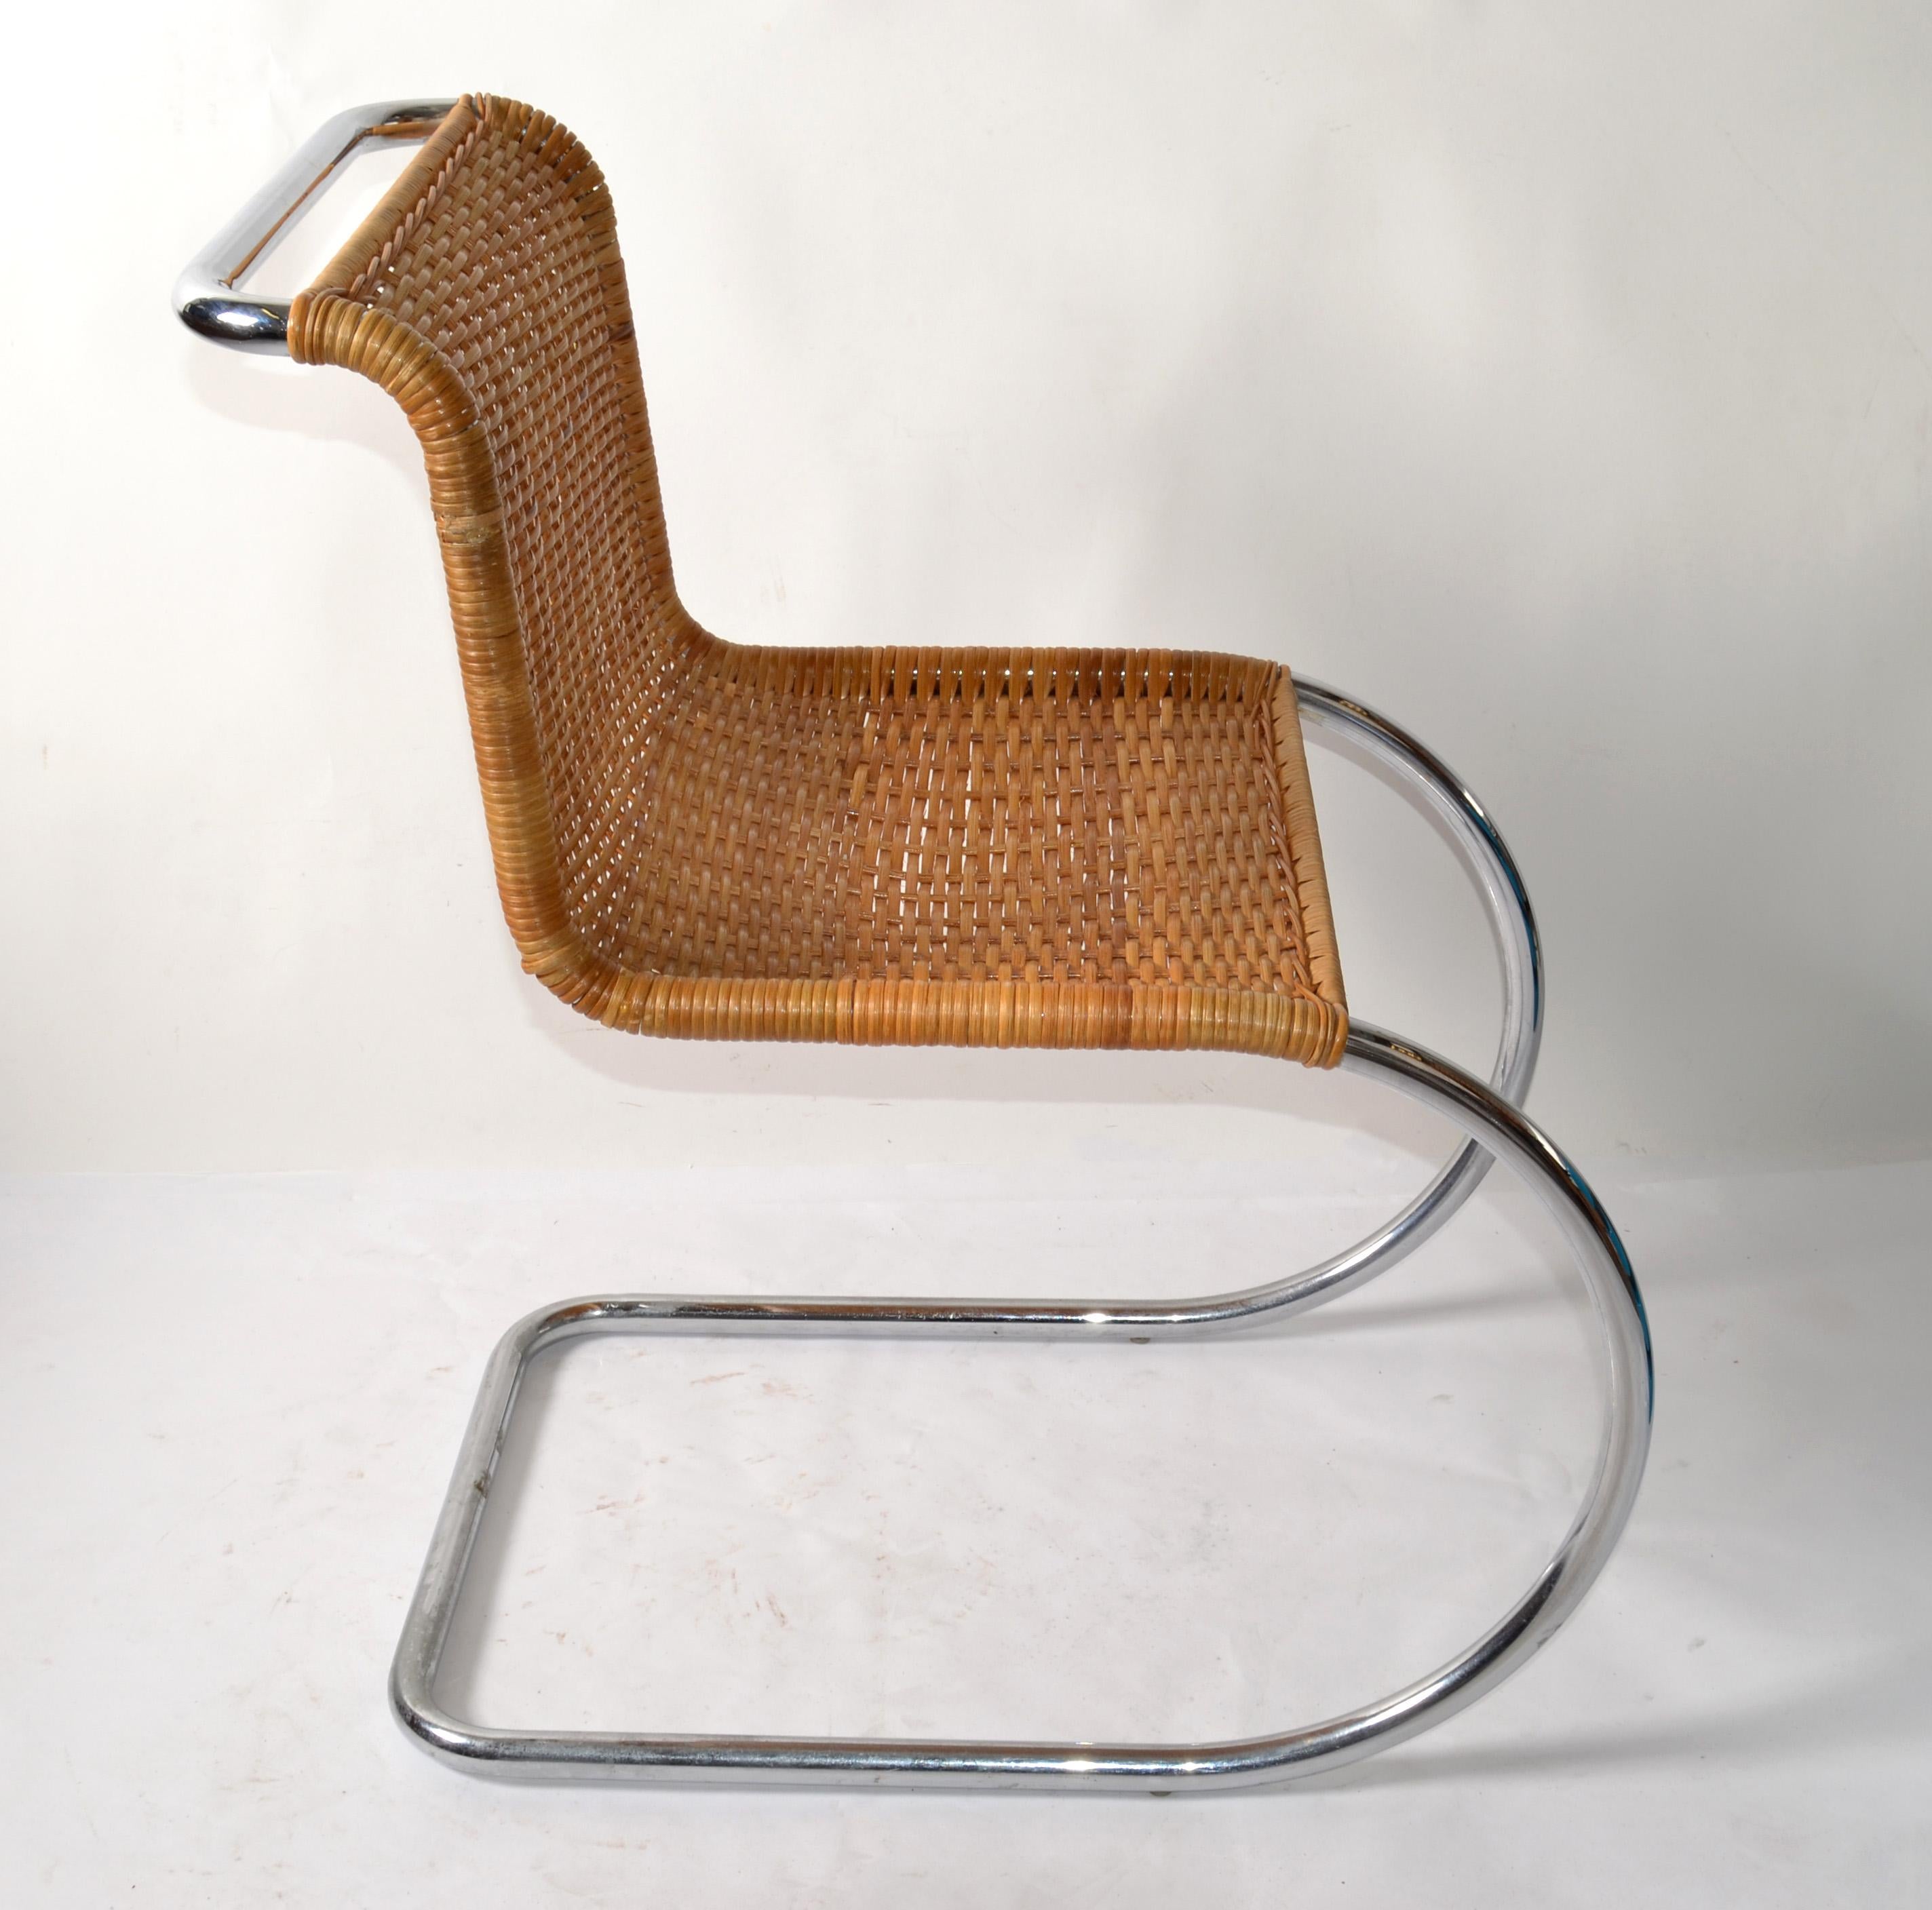 Ludwig Mies van der Rohe attributed Mr Chair armless Cantilever Side Chair in Chrome Finish with the original handwoven Cane Seat attributed to Knoll.
The MR Collection represents some of the earliest steel furniture designs by Mies van der Rohe.